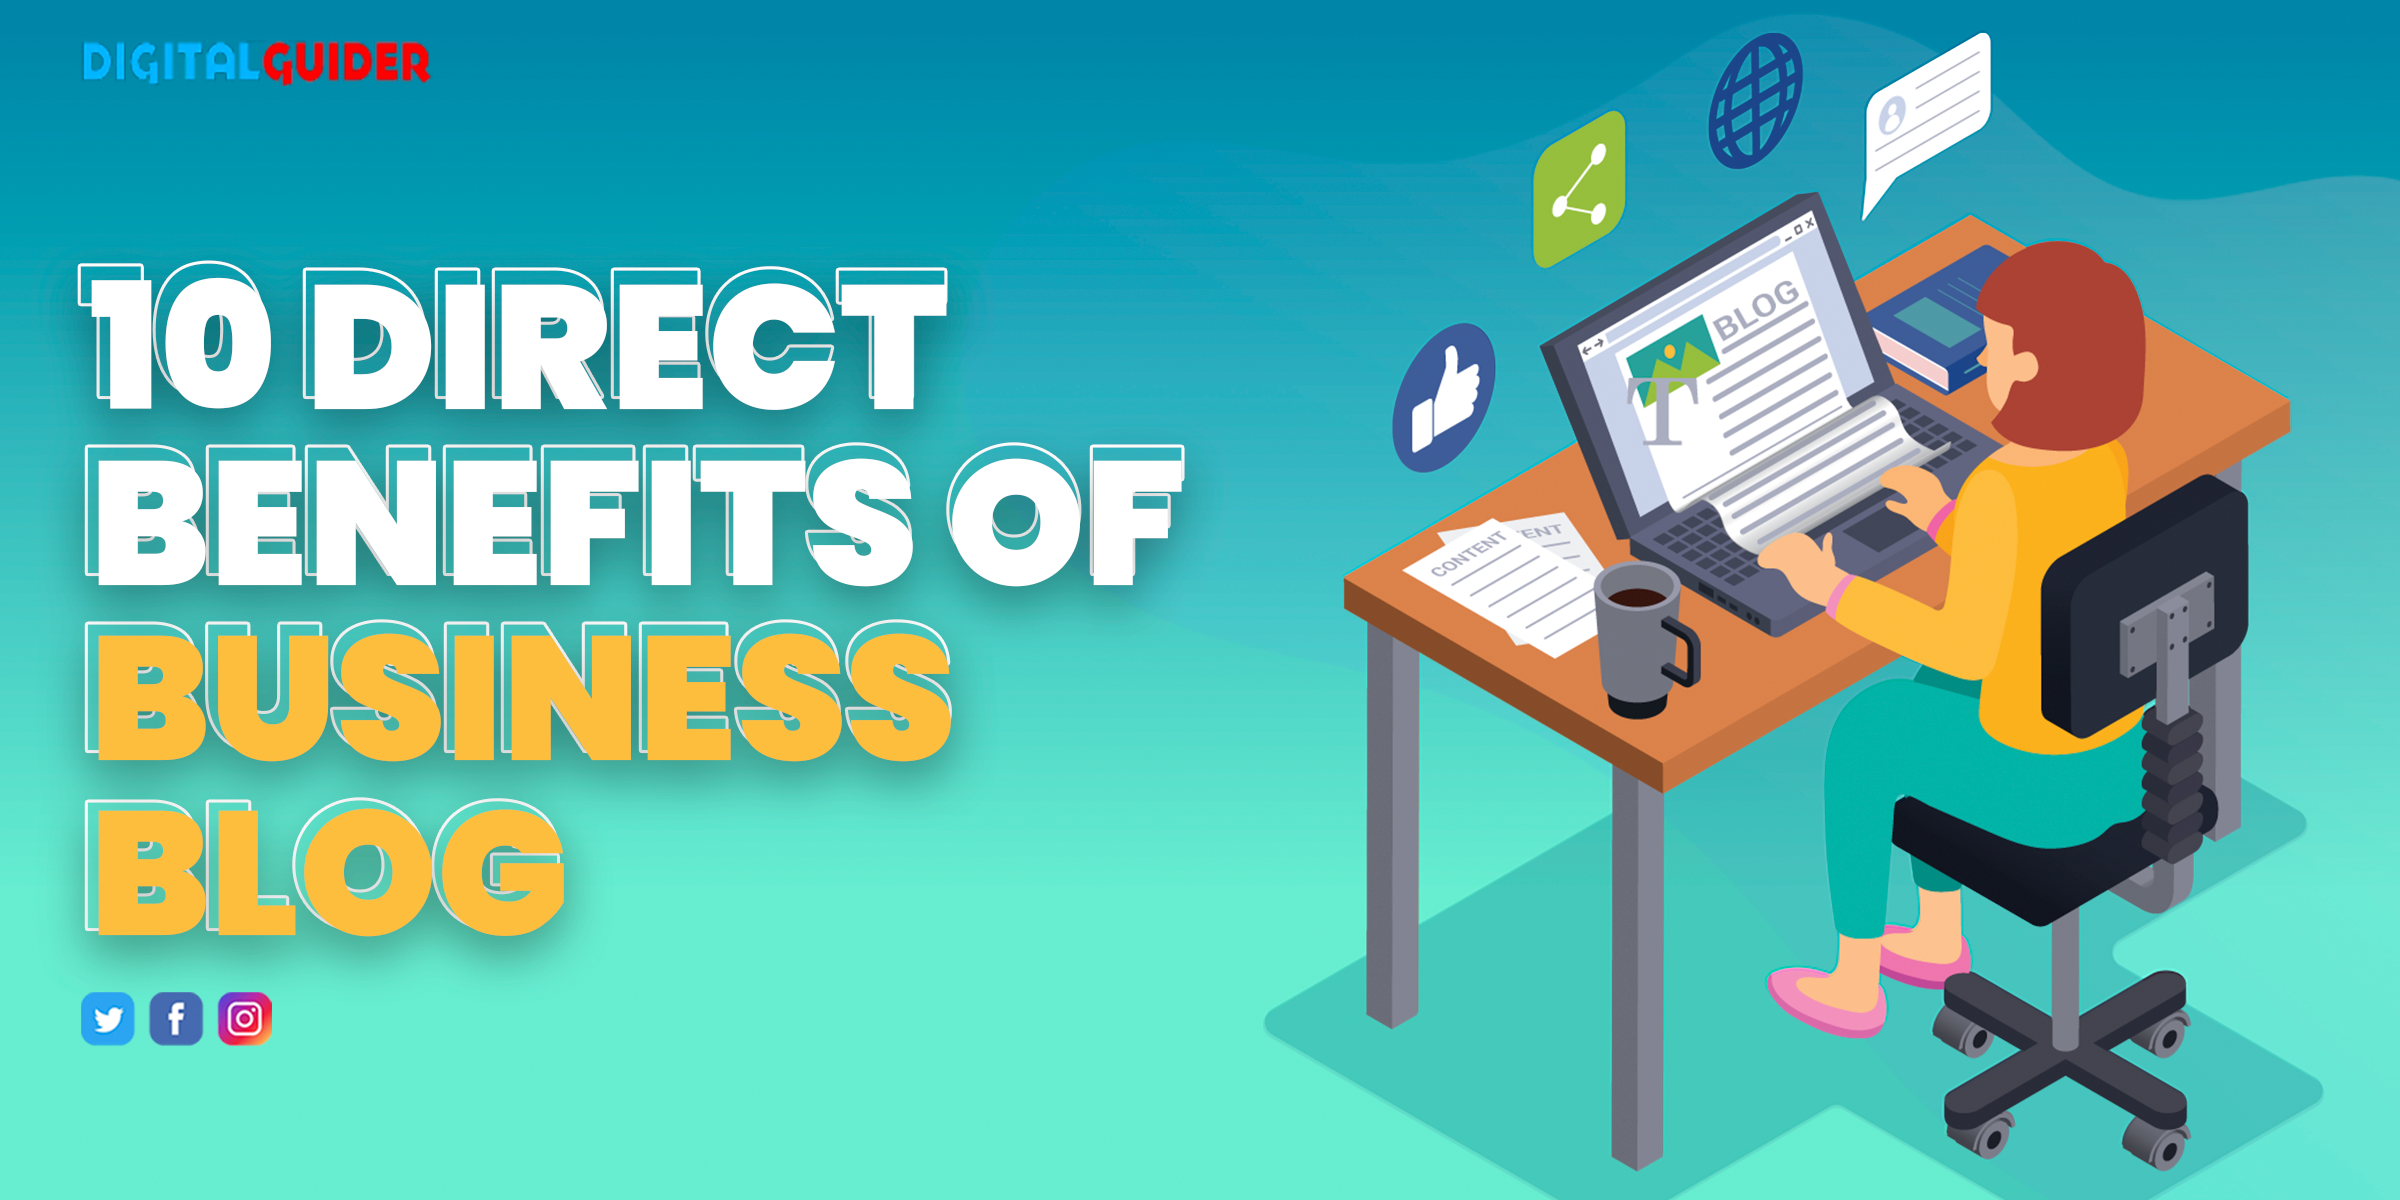 10 Direct Benefits of Business Blog